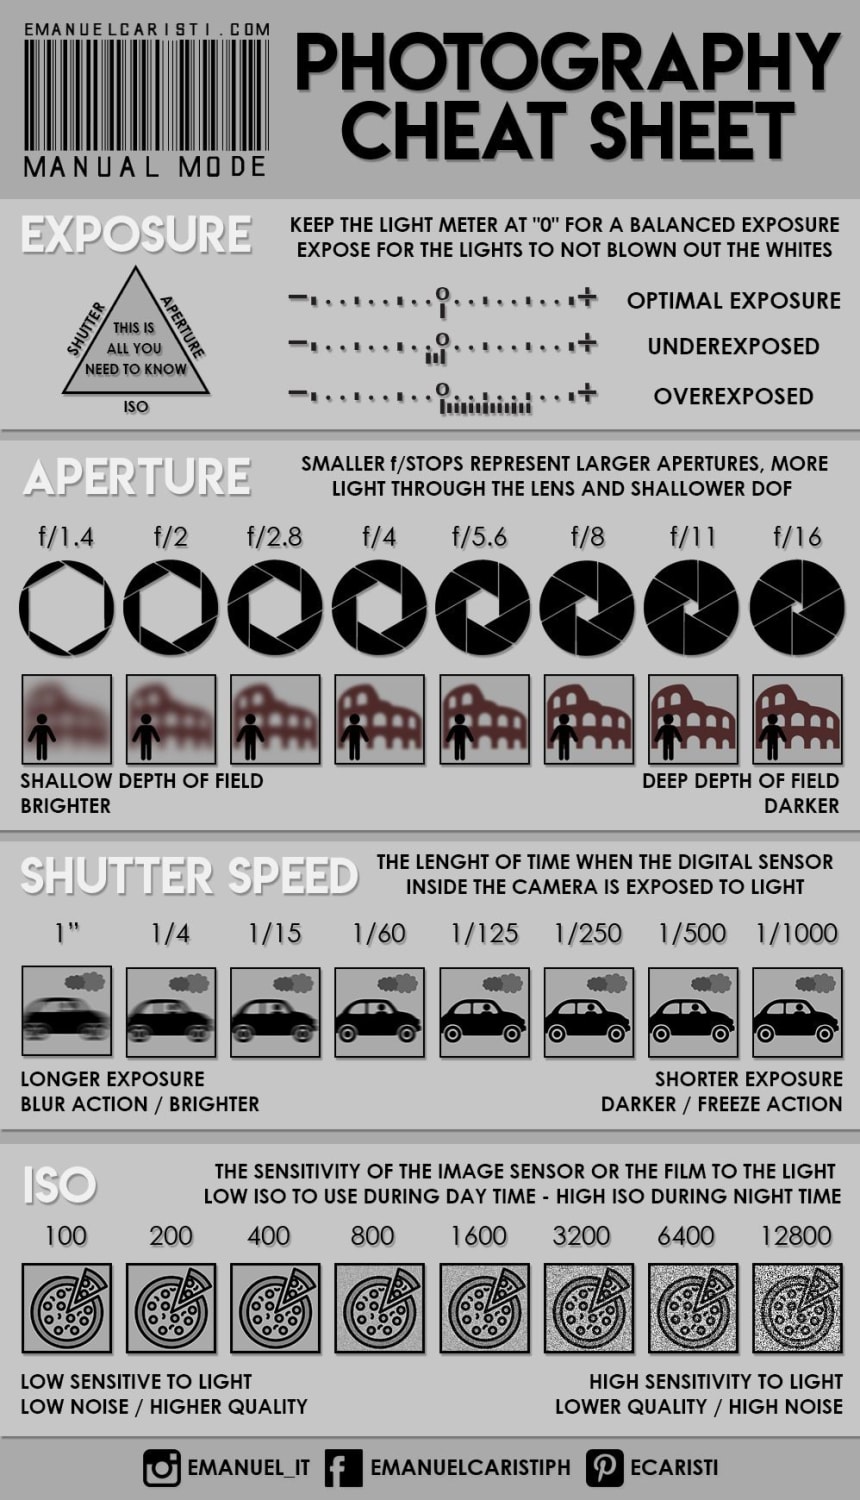 Neat photography cheat sheet for beginner photographers. Made by Emanuel Caristiph.